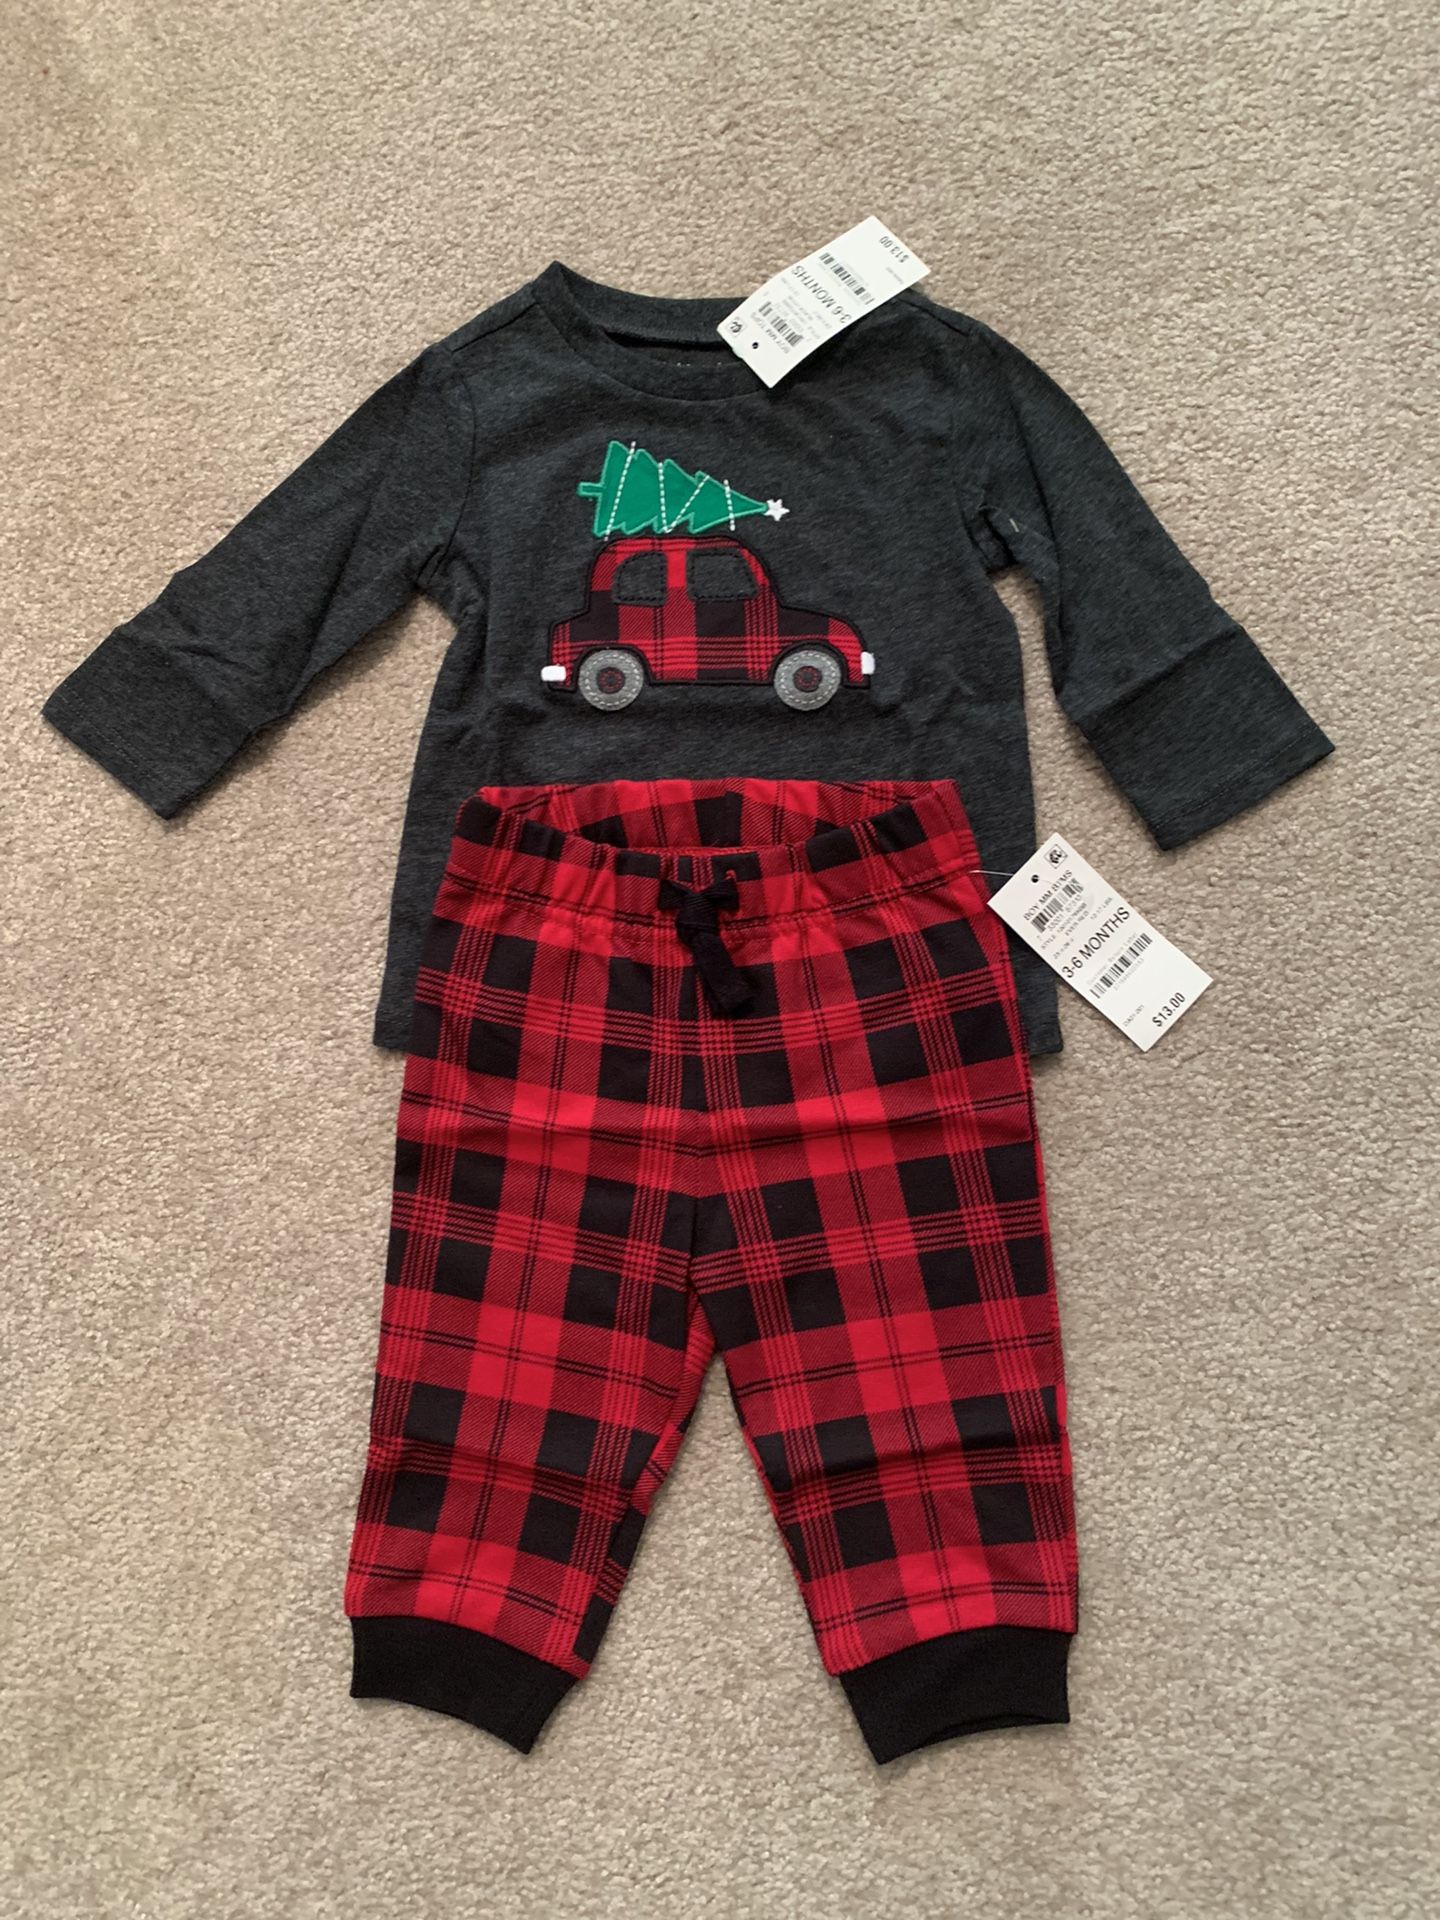 Boys Holiday Winter Outfit, Red Buffalo Plaid, Truck And Tree Embellishment,OPP $26,Brand New!